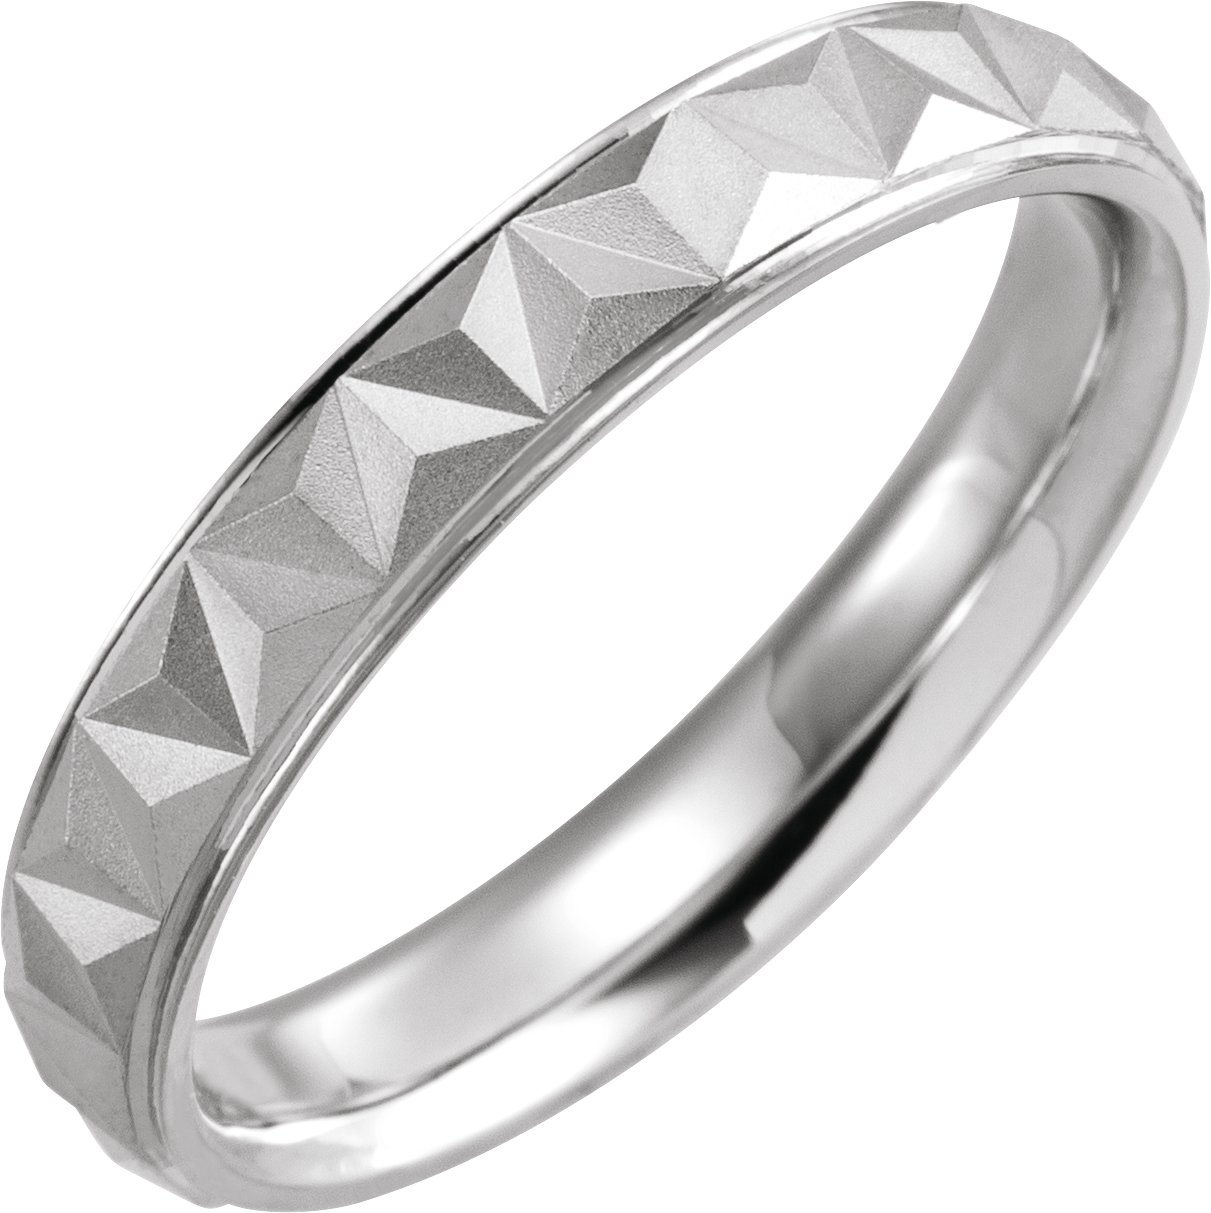 Sterling Silver 4 mm Geometric Band with Matte/Polished Finish Size 6